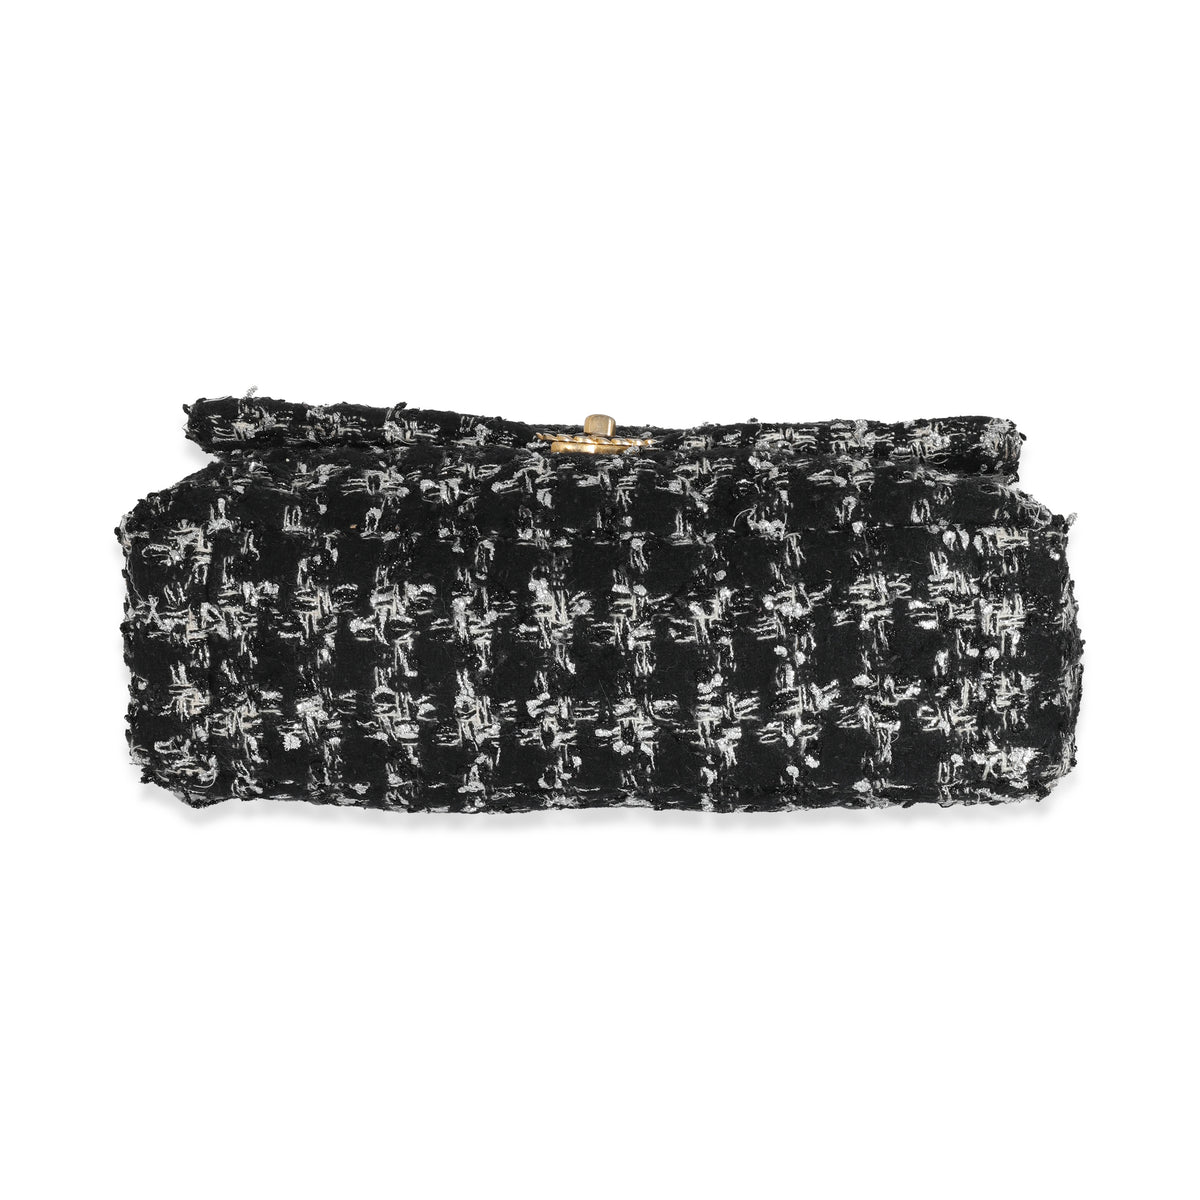 Only 2678.00 usd for CHANEL 19 Maxi Flap Bag in Beige Black Houndstooth  Tweed Online at the Shop